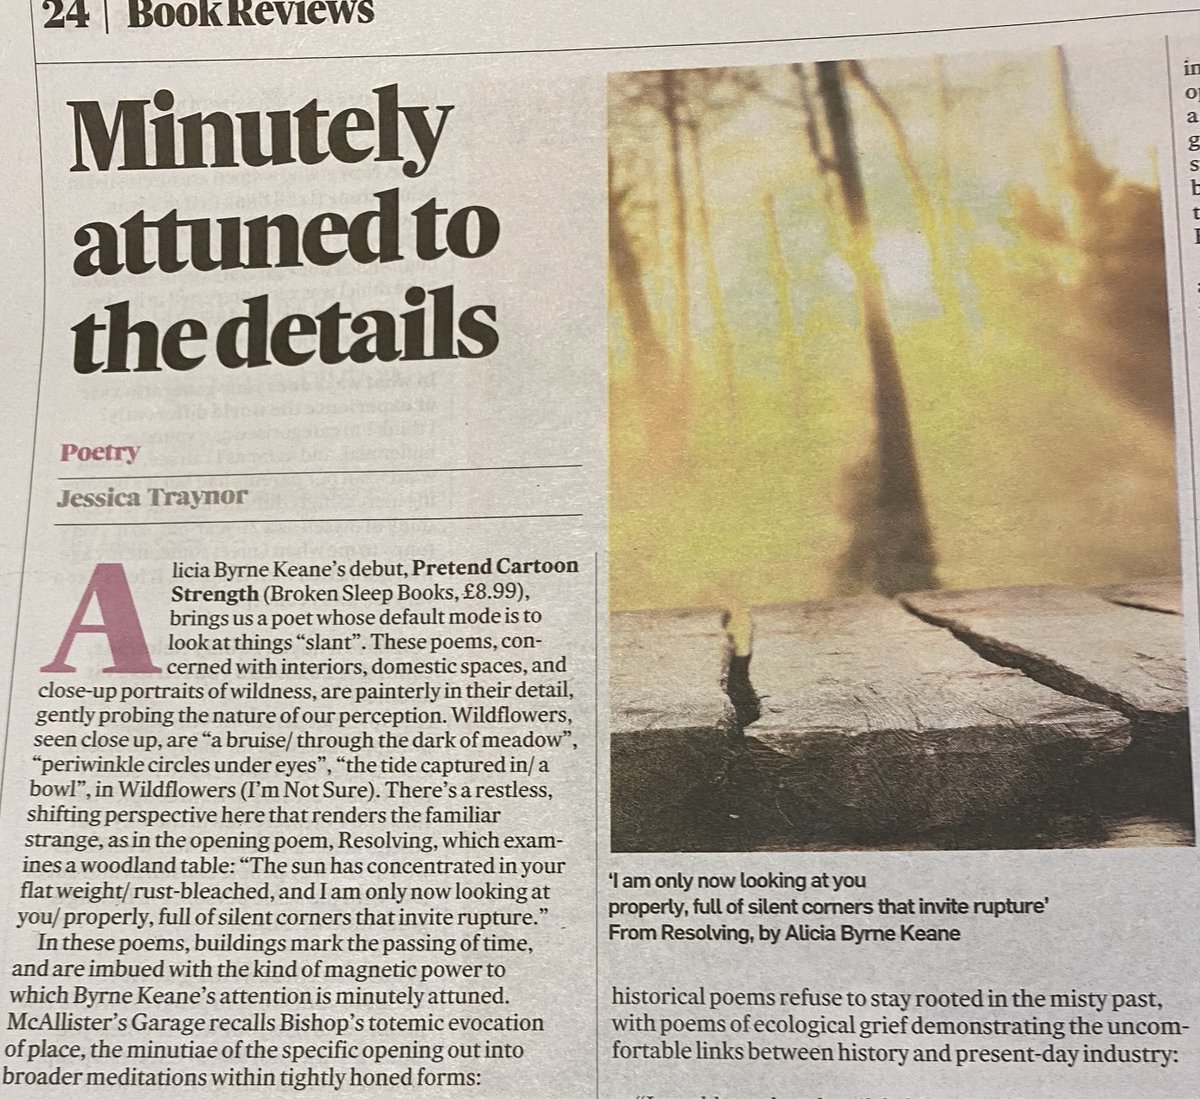 @keane_byrne 'Pretend Cartoon Strength' from @brokensleepbooks has been reviewed today in @IrishTimes @IrishTimesBooks by @JessicaTraynor6, compares Alicia Byrne Keane's debut poetry collection to that of Elizabeth Bishop !